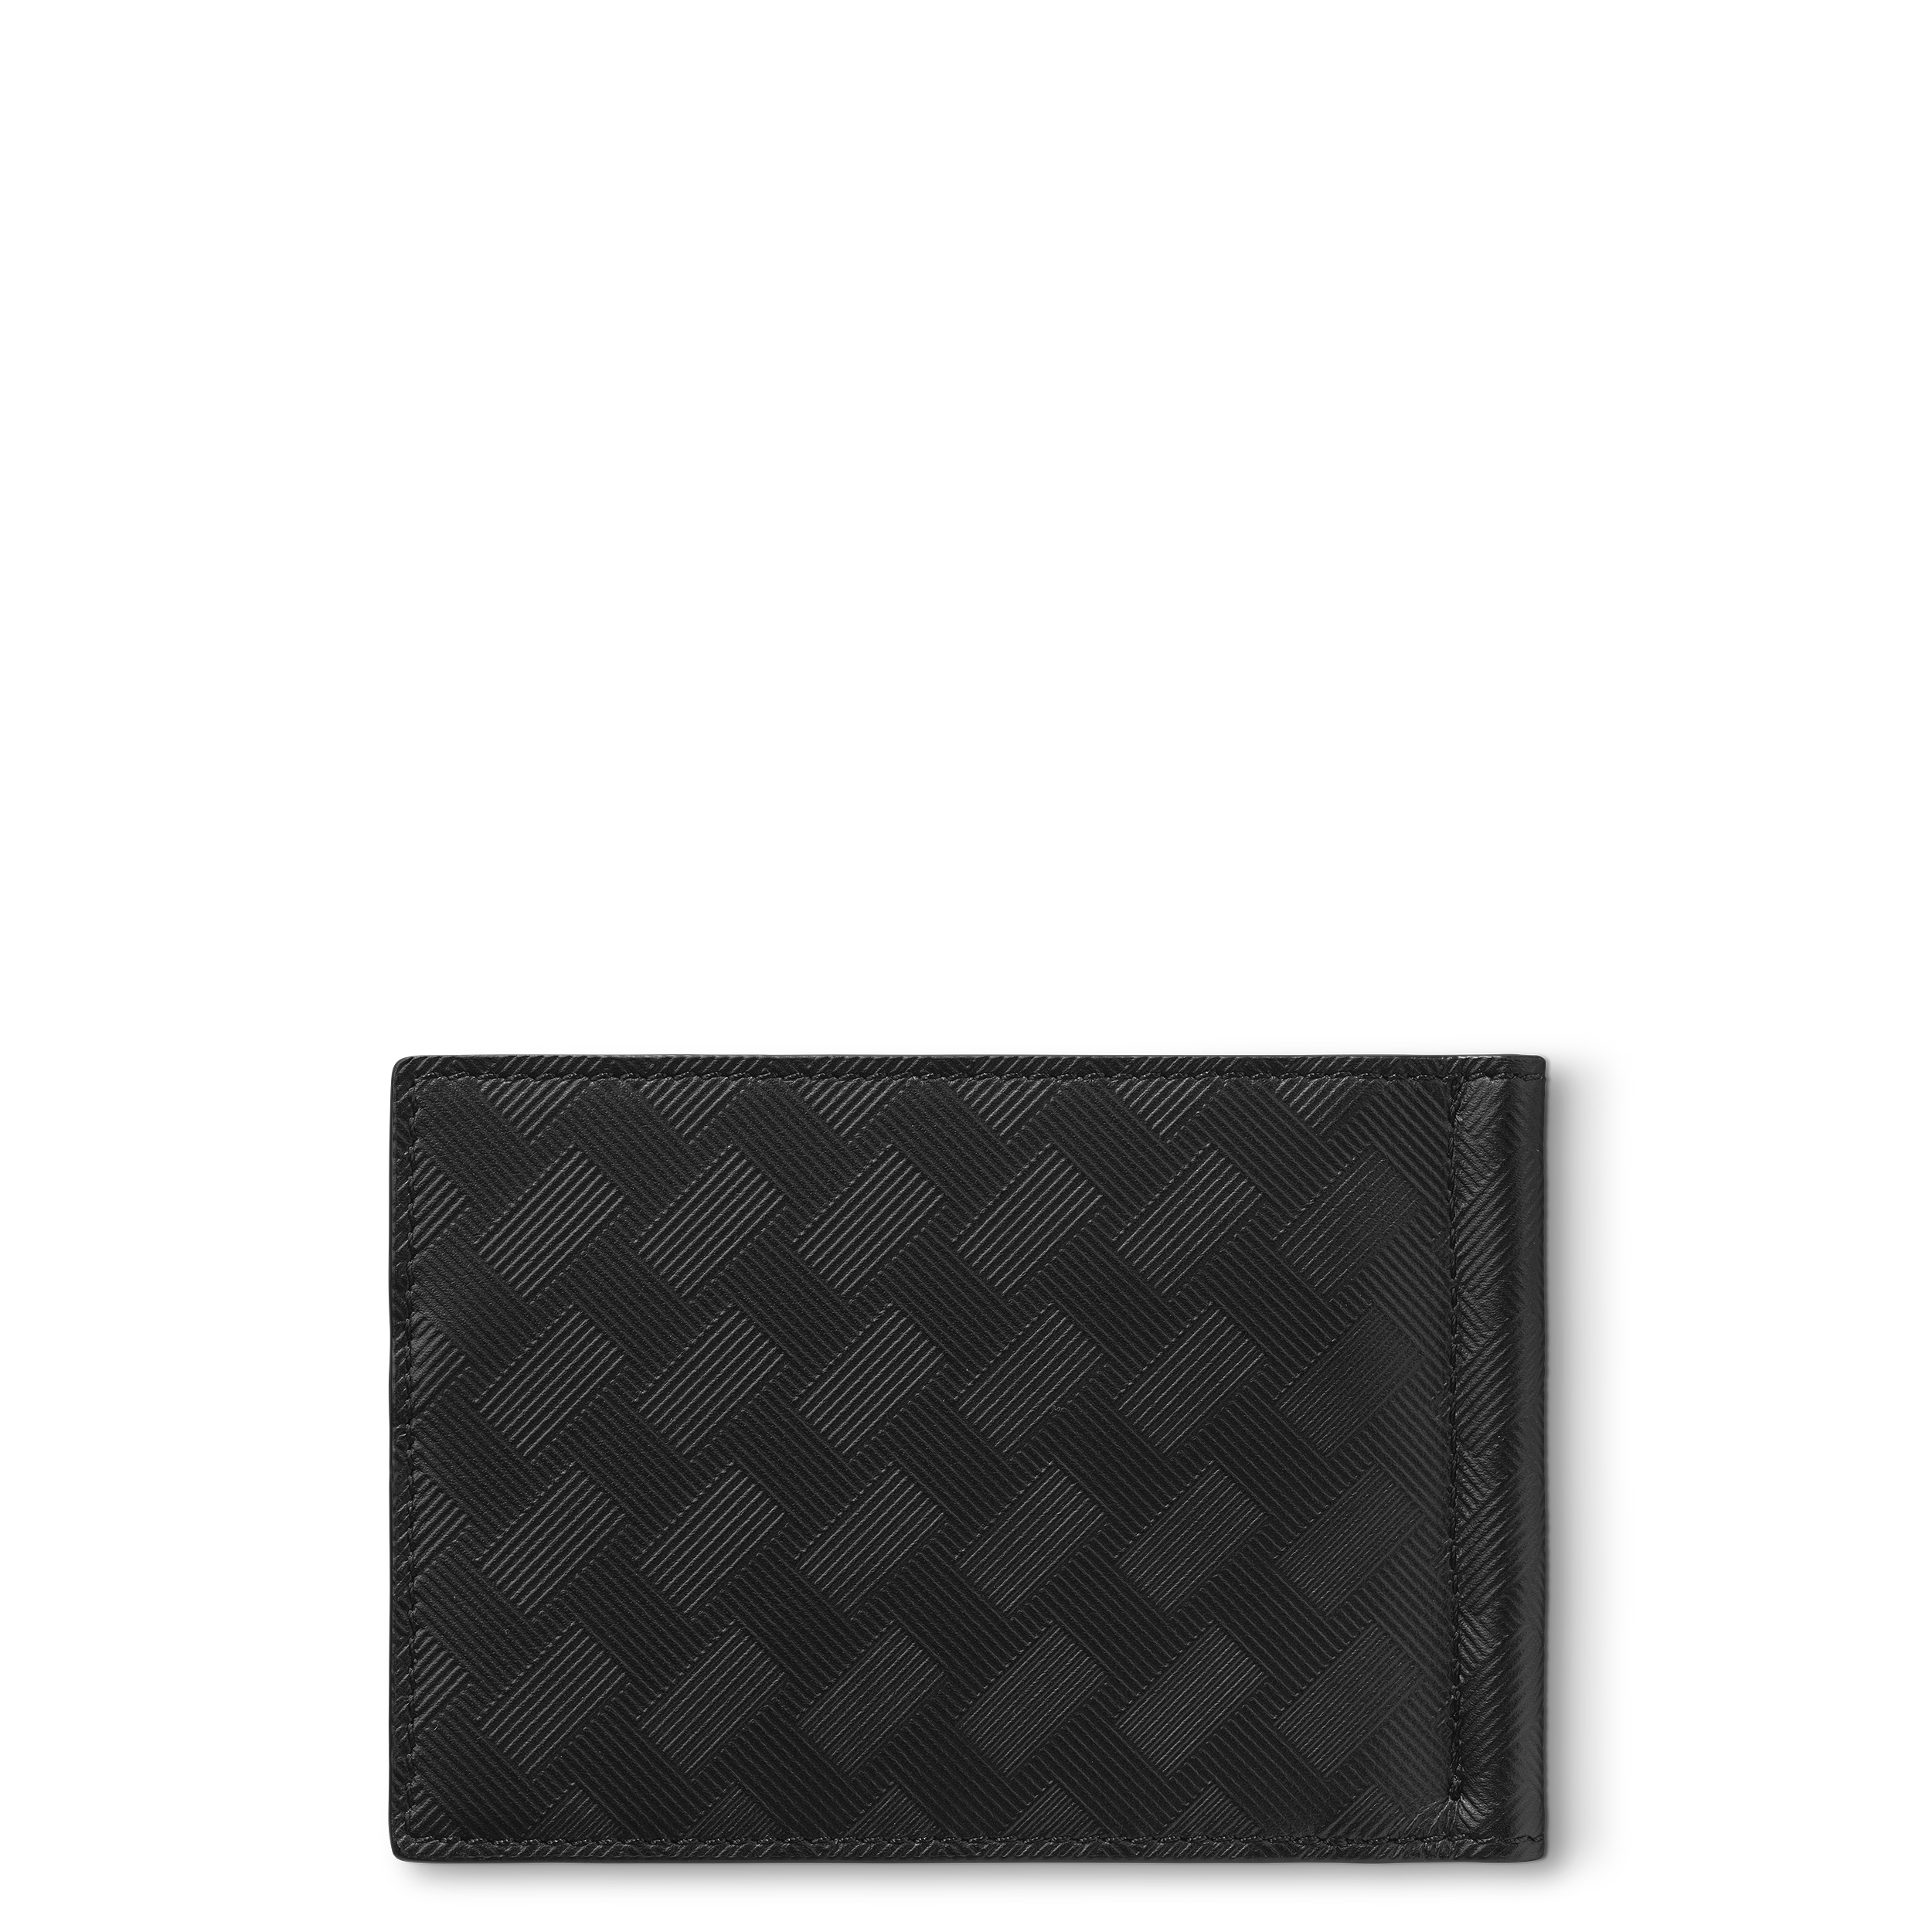 Montblanc Extreme 3.0 wallet 6cc with money clip, image 8